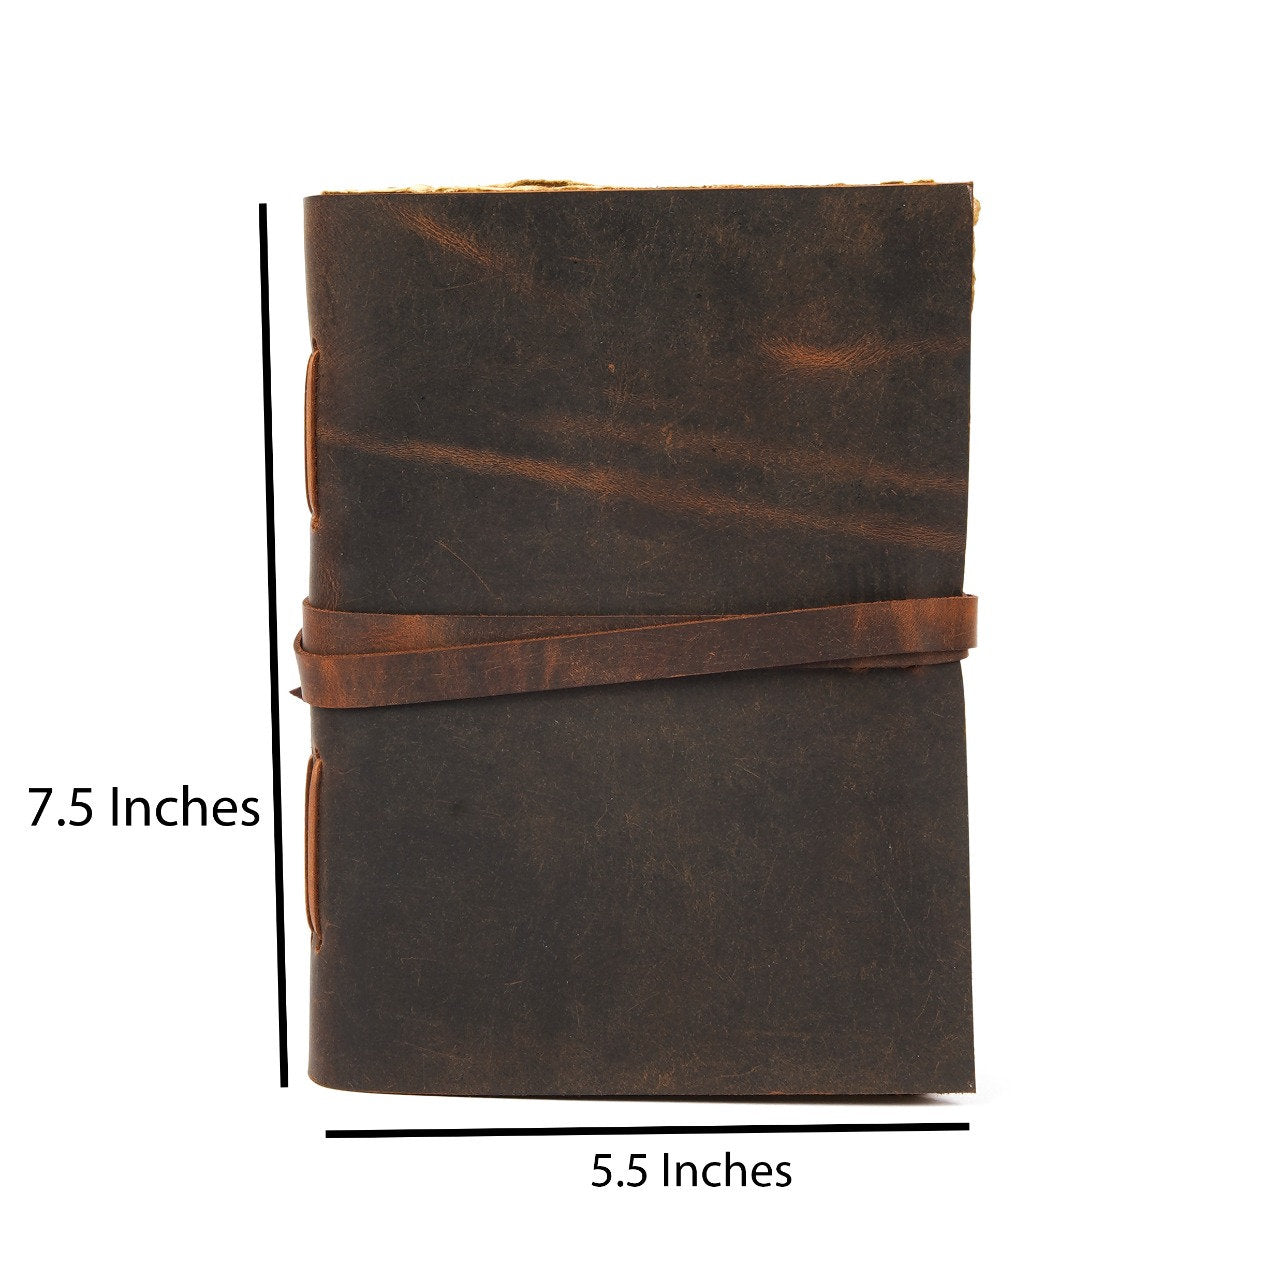 Vintage Leather Journal Book - A4 size.